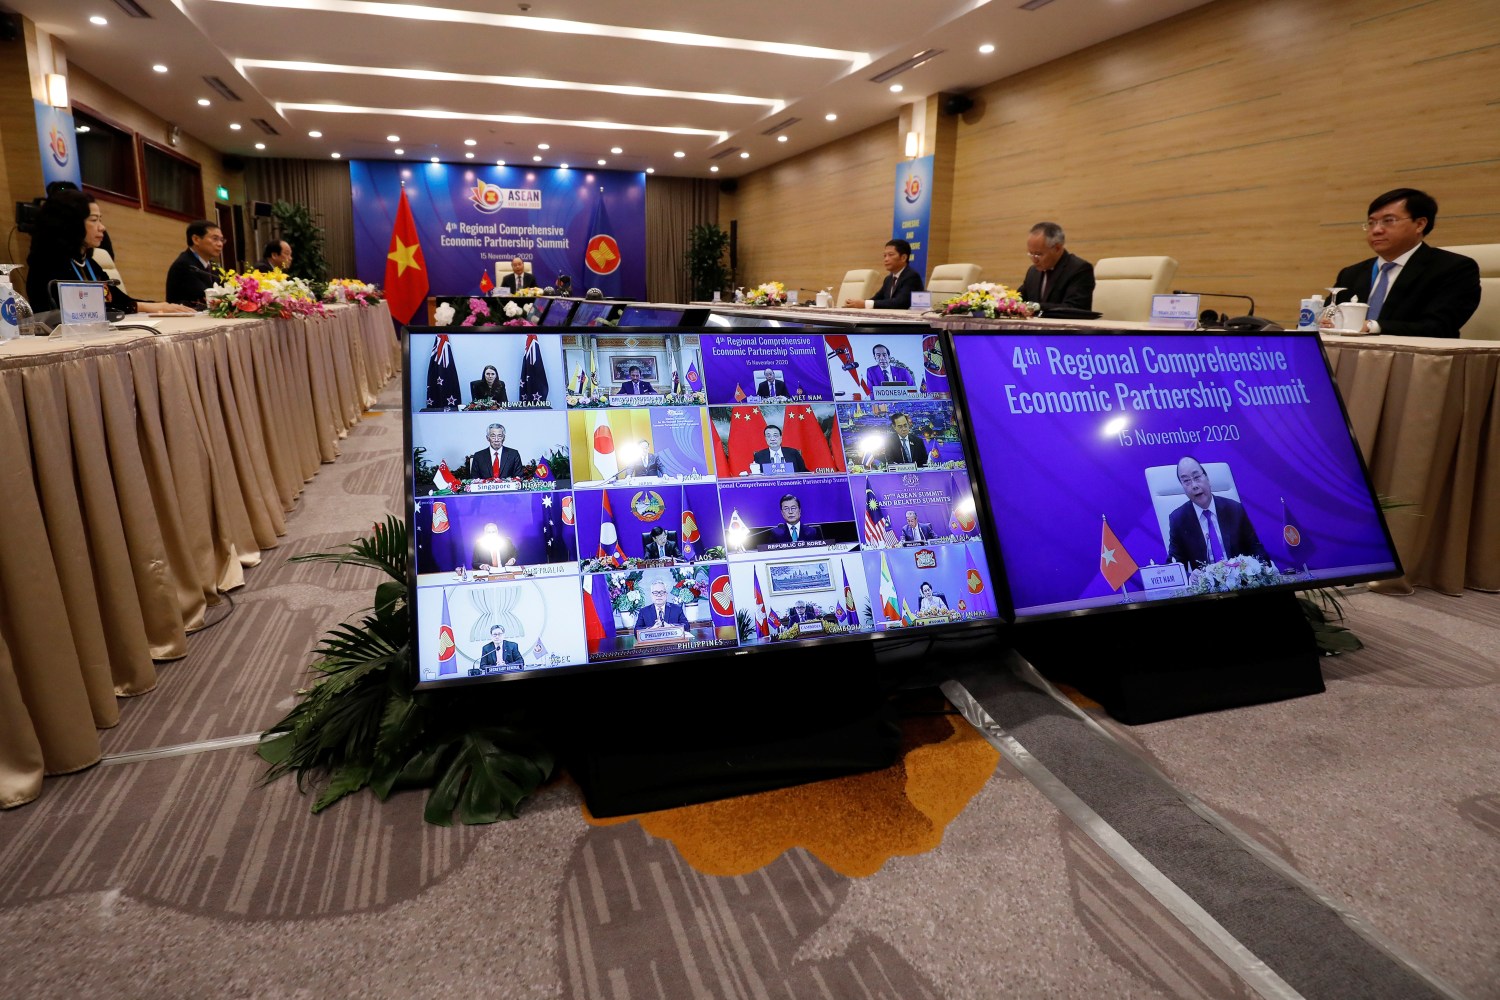 Vietnam's Prime Minister Nguyen Xuan Phuc chairs the 4th Regional Comprehensive Economic Partnership Summit as part of the 37th ASEAN Summit in Hanoi, Vietnam November 15, 2020. REUTERS/Kham